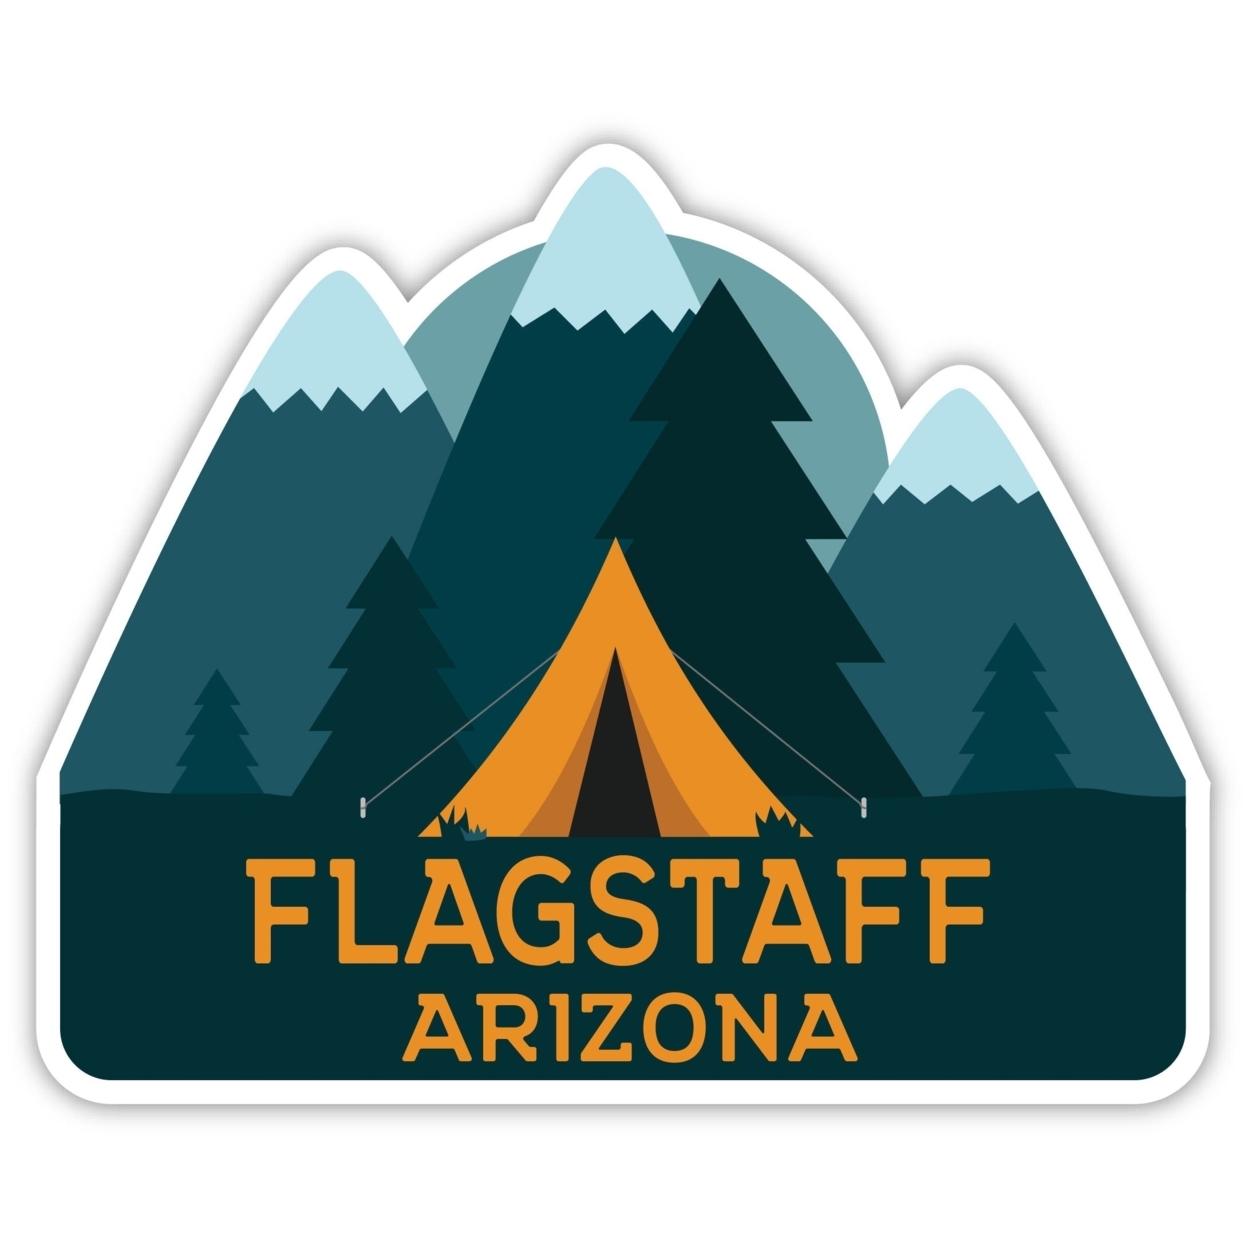 Flagstaff Arizona Souvenir Decorative Stickers (Choose Theme And Size) - 4-Pack, 2-Inch, Great Outdoors